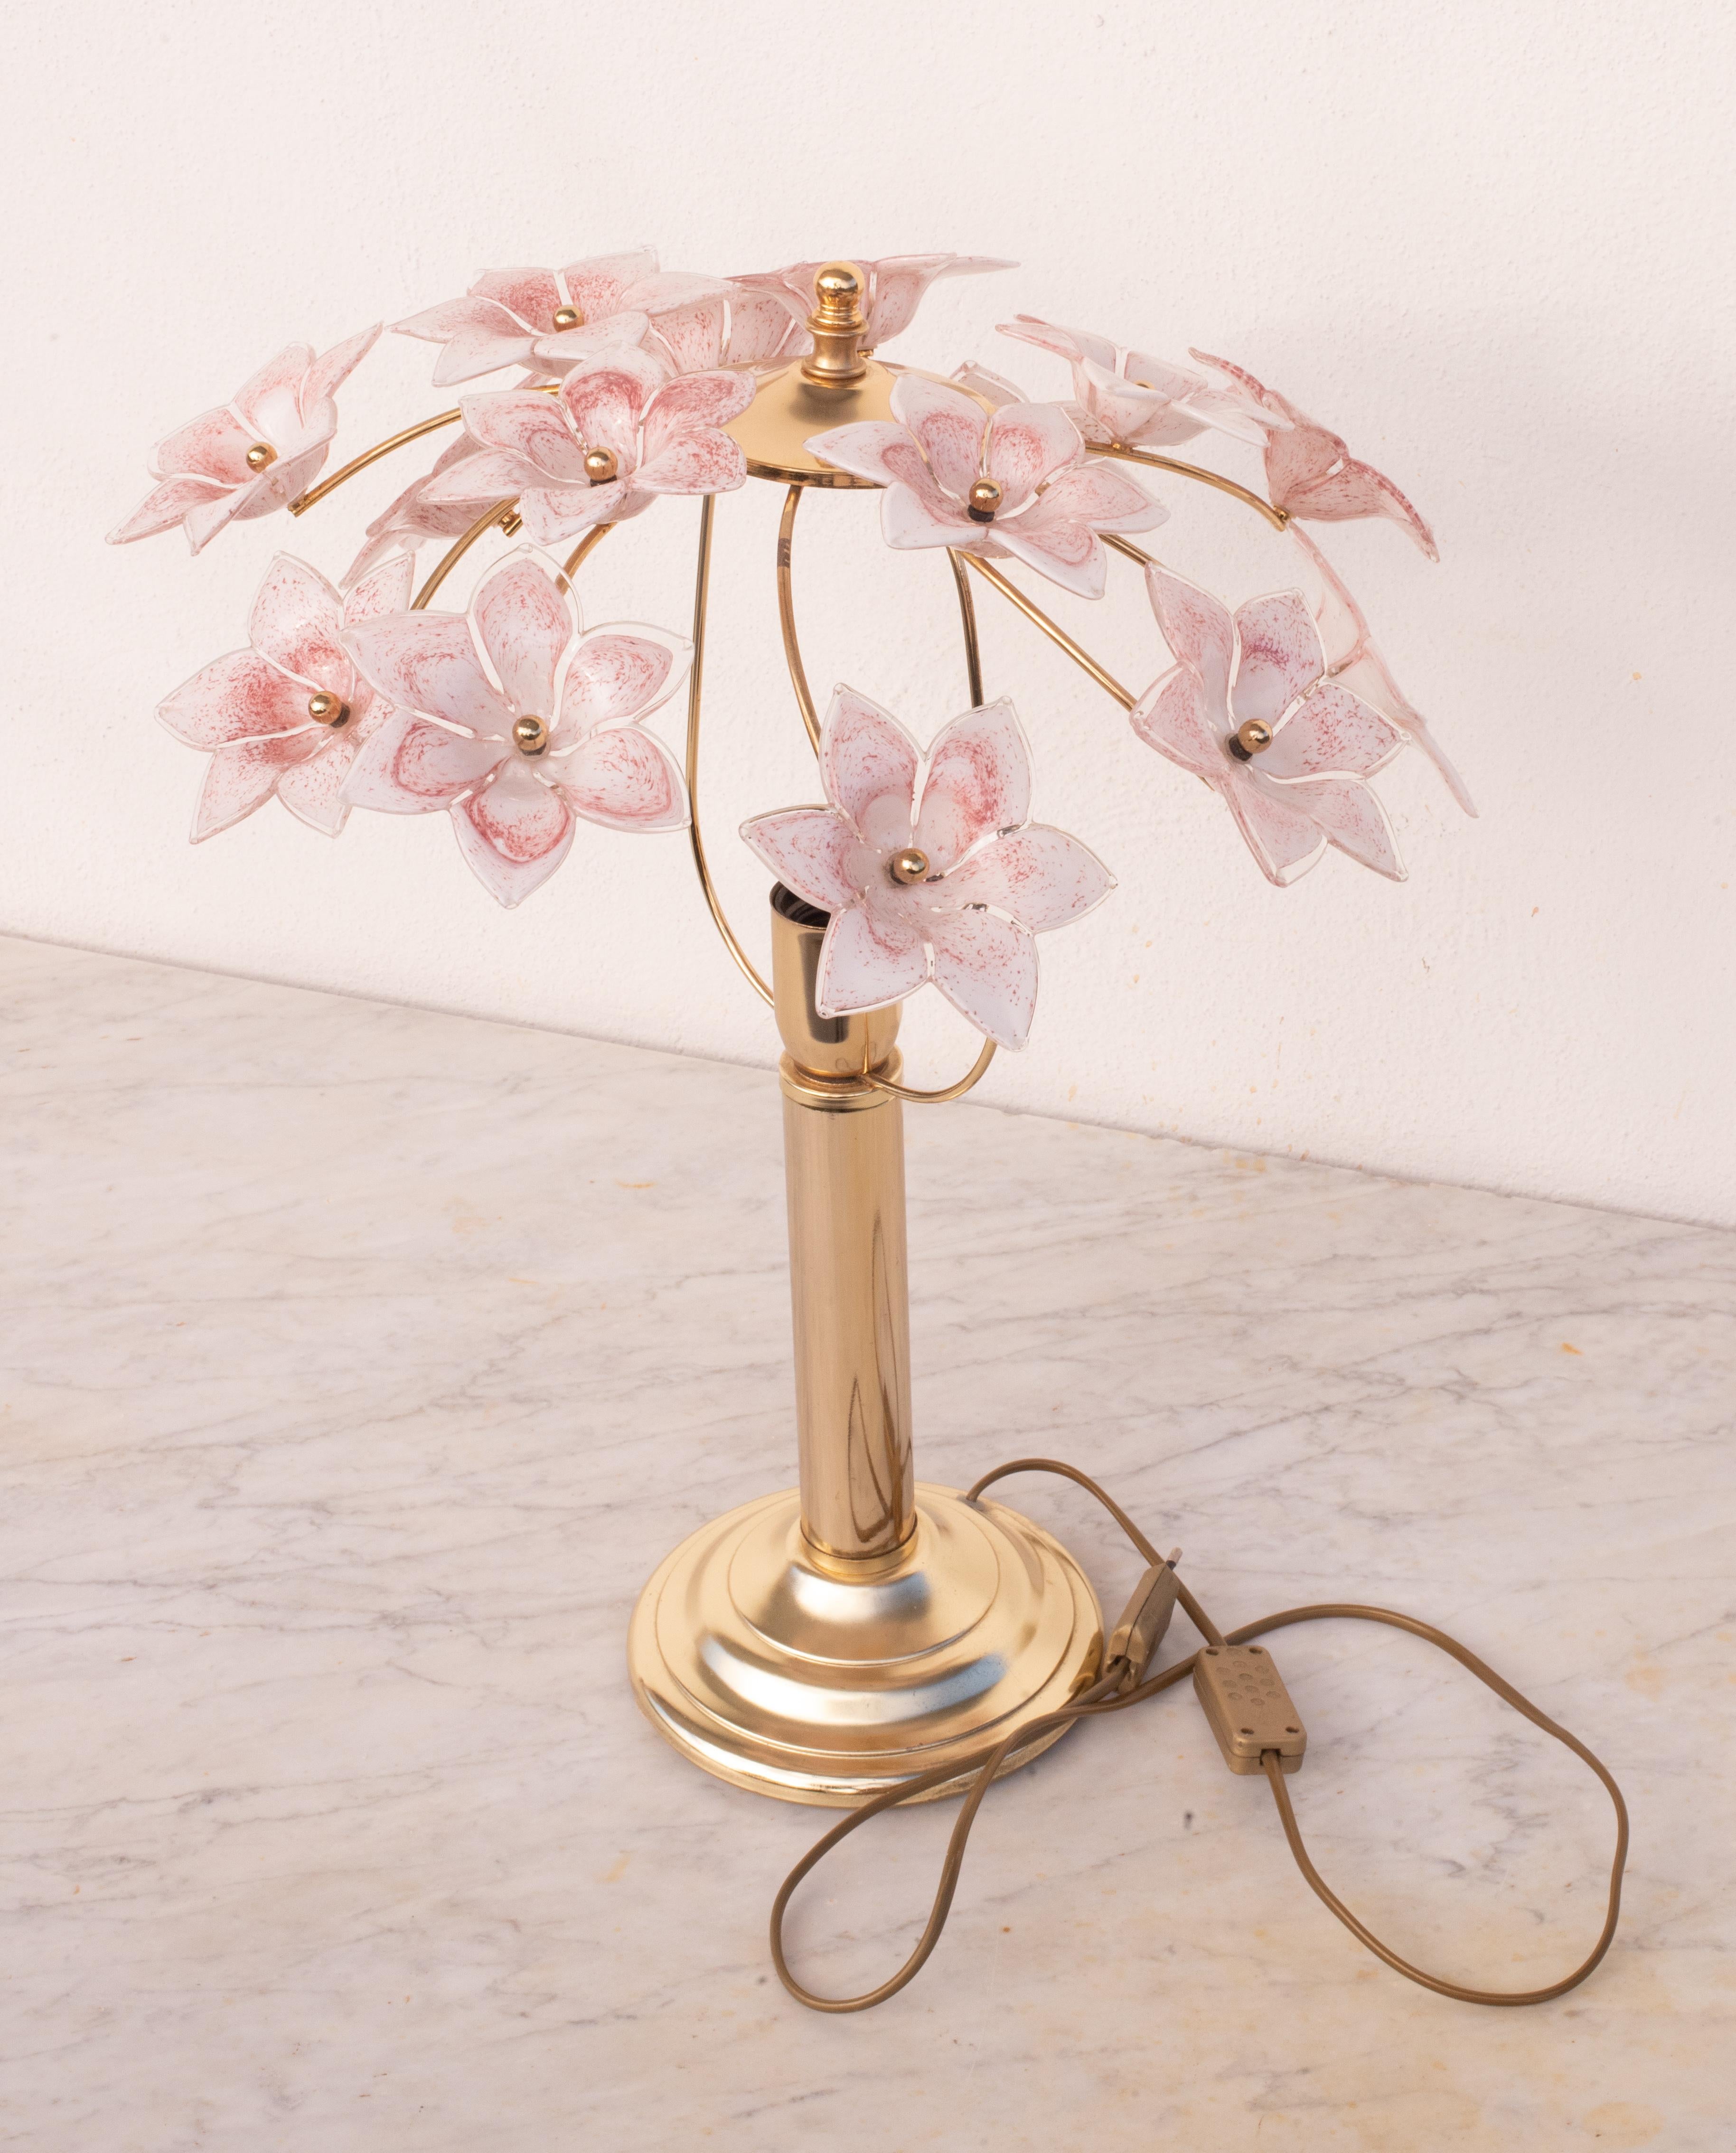 Pretty table light with Murano glass pink flowers.
Accommodates one E27 screw-in bulbs, European standards, possible replace for Us standard.
Measurements:
56 cm width
Height 56 cm
Excellent vintage condition